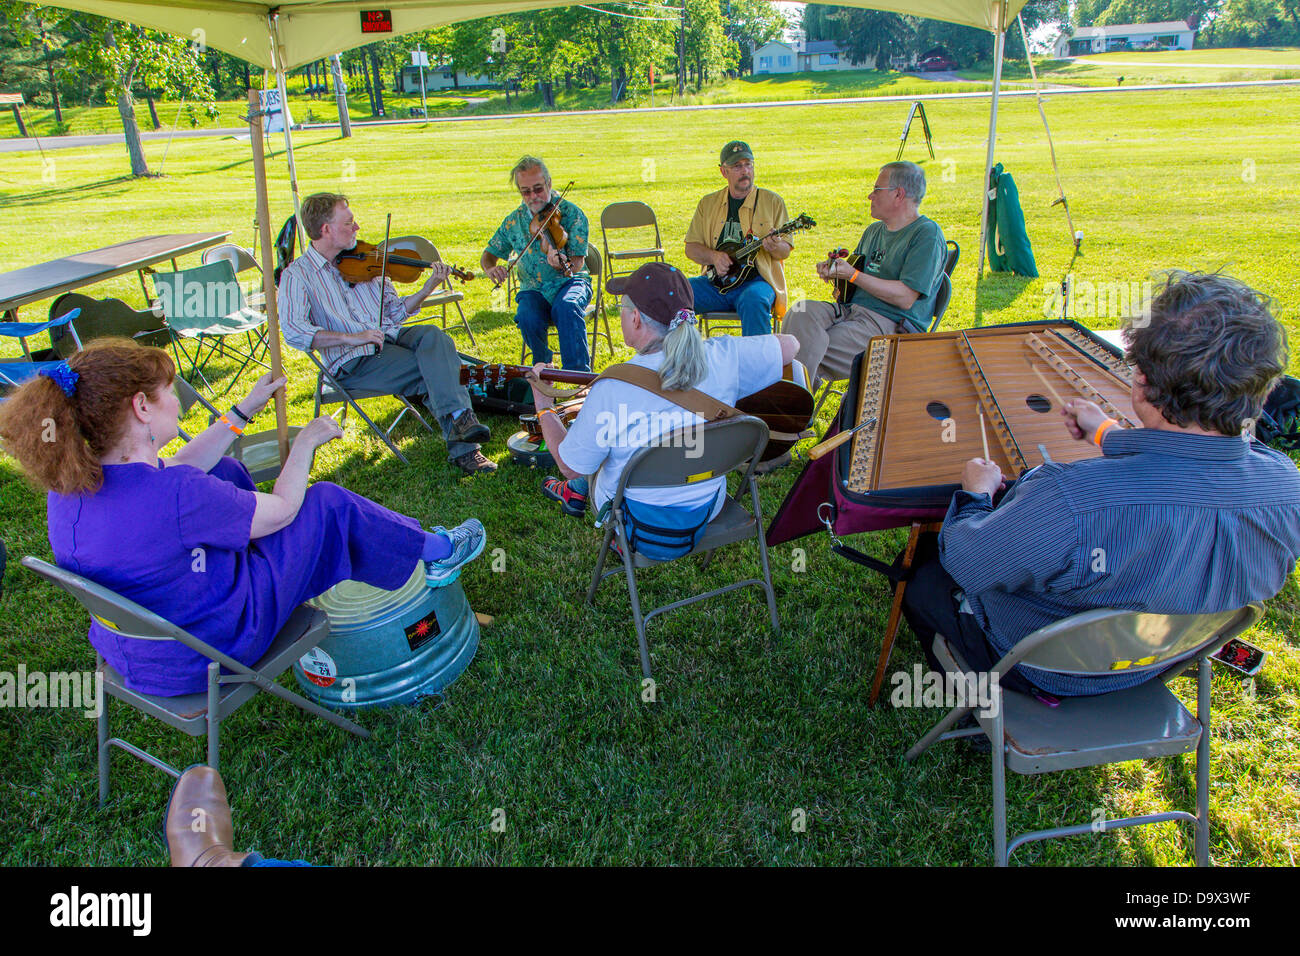 Jam tent at Old Time Fiddlers Gathering at Lakewood Vineyards on Seneca lake in the Finger Lakes region of New York Stock Photo